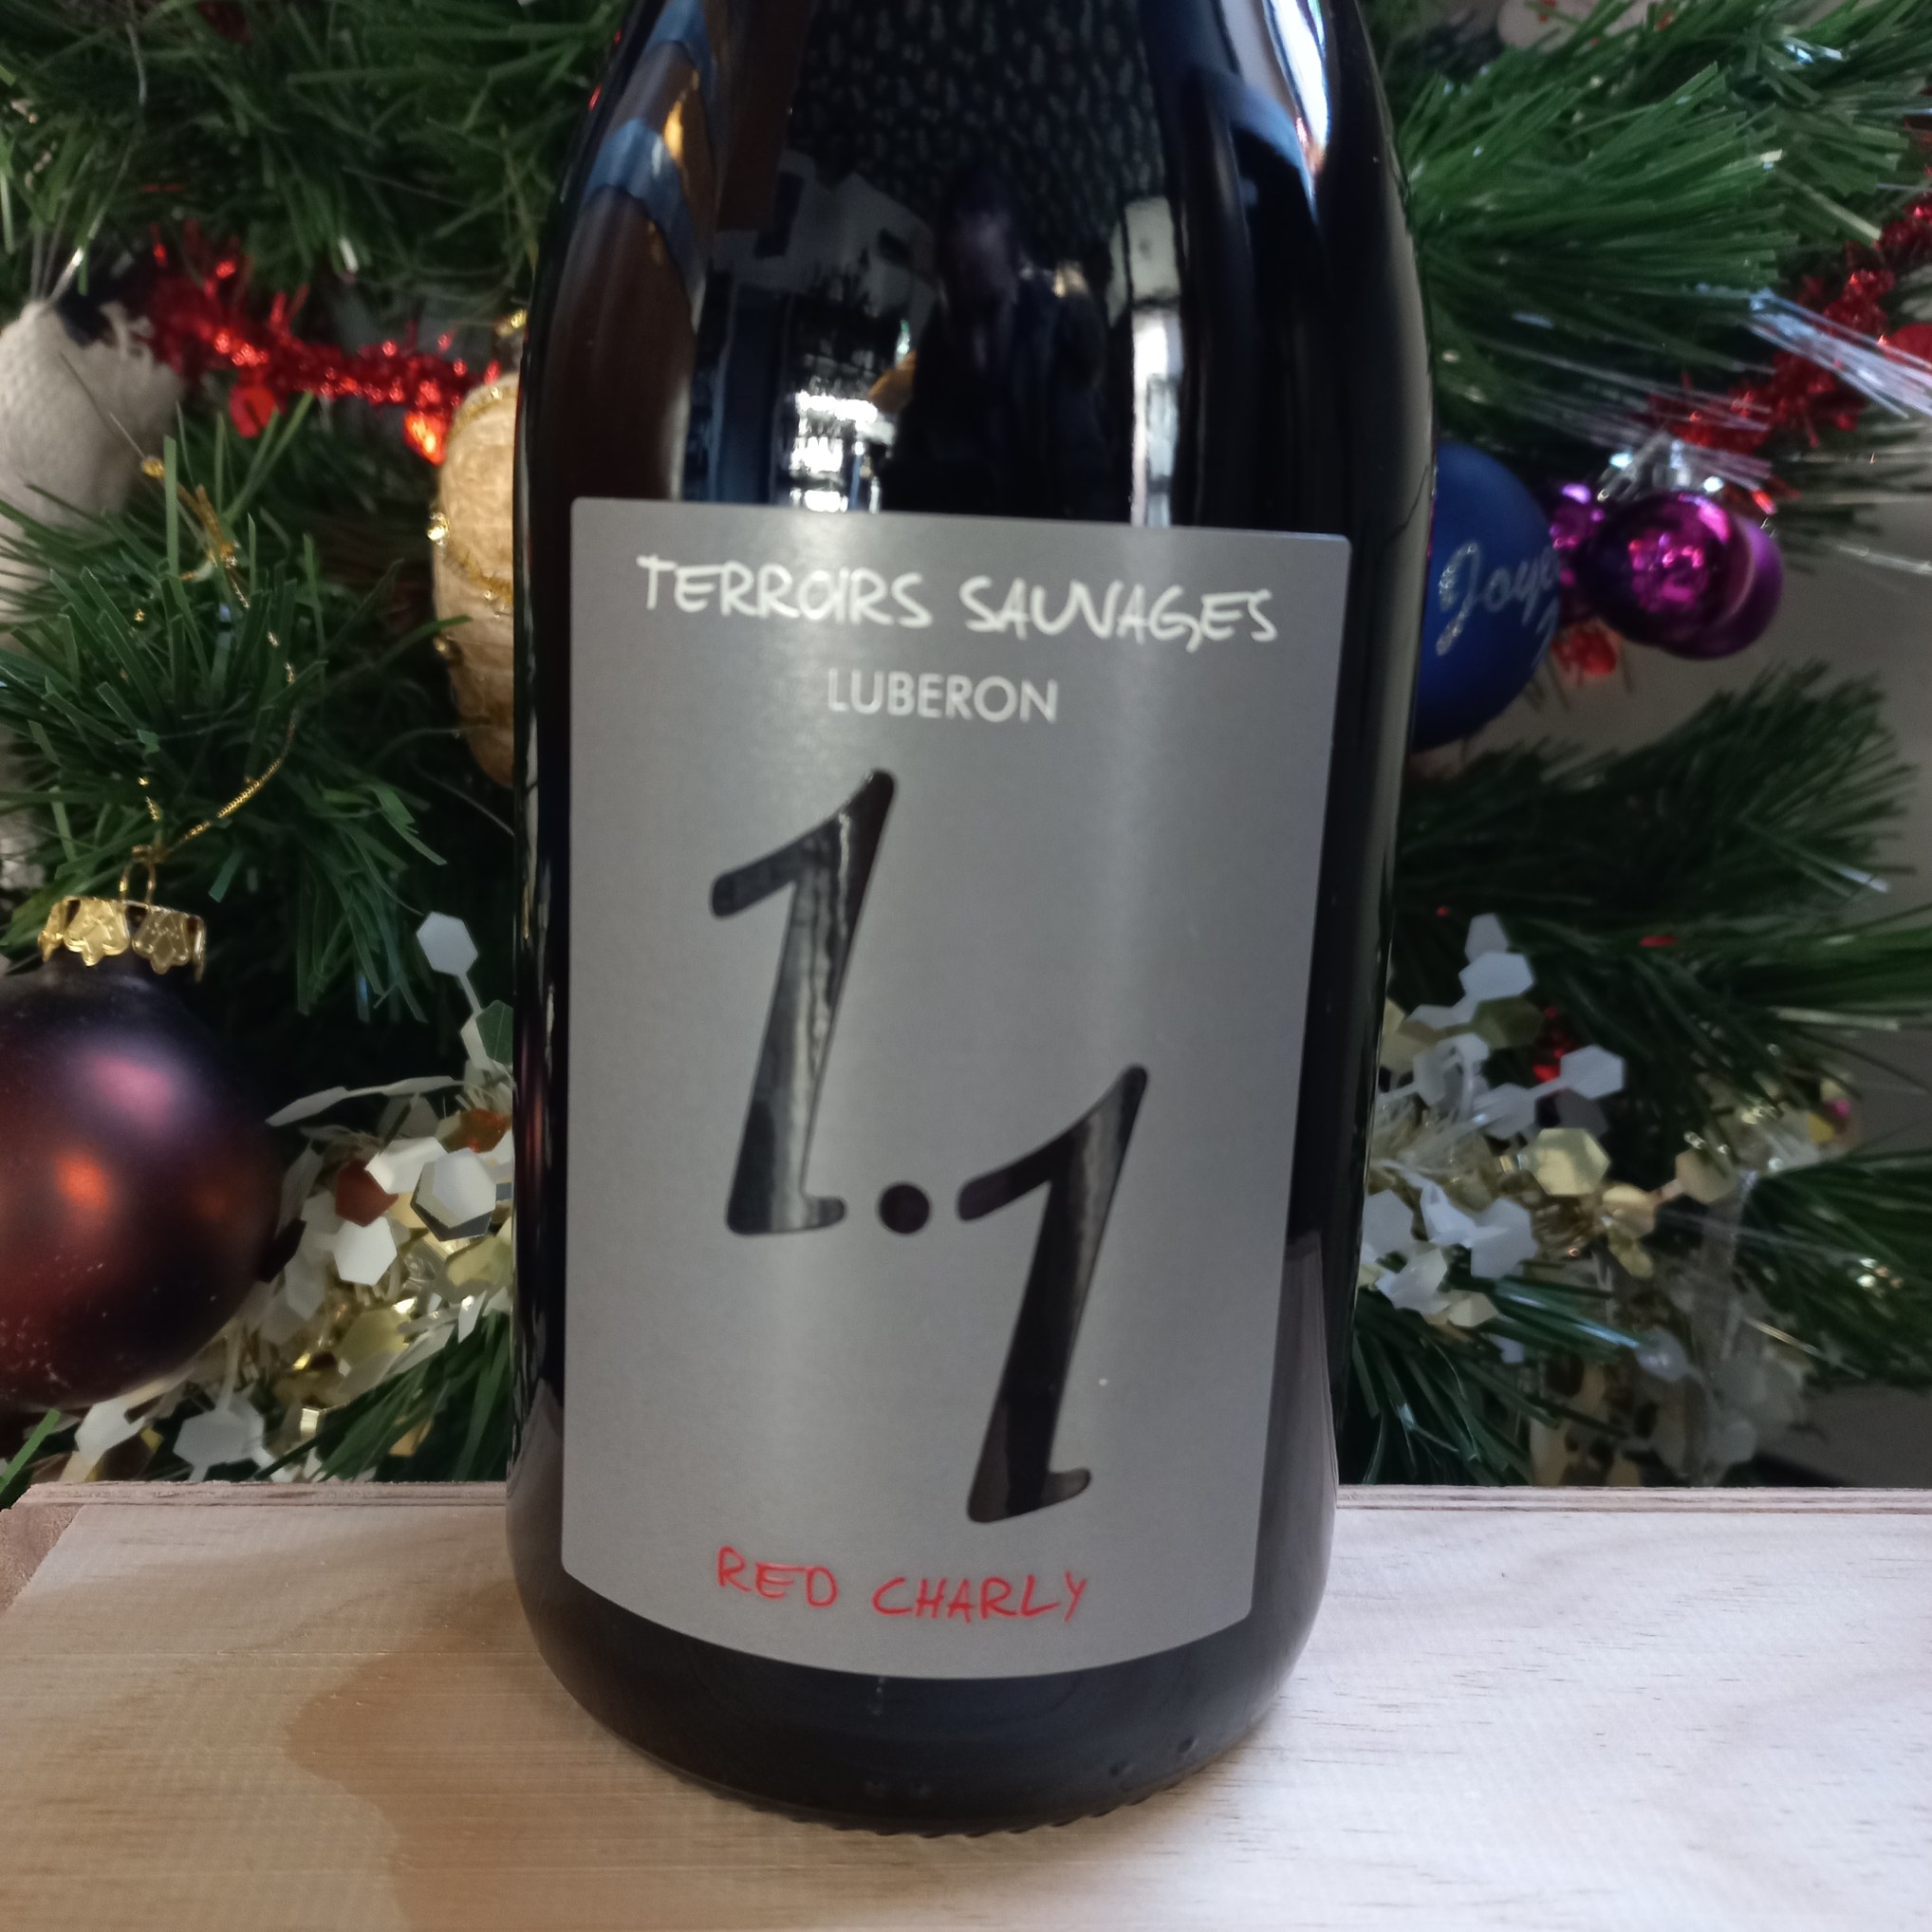 Terroirs Sauvages. Red Charly 1.1. AOP Lubéron 2018